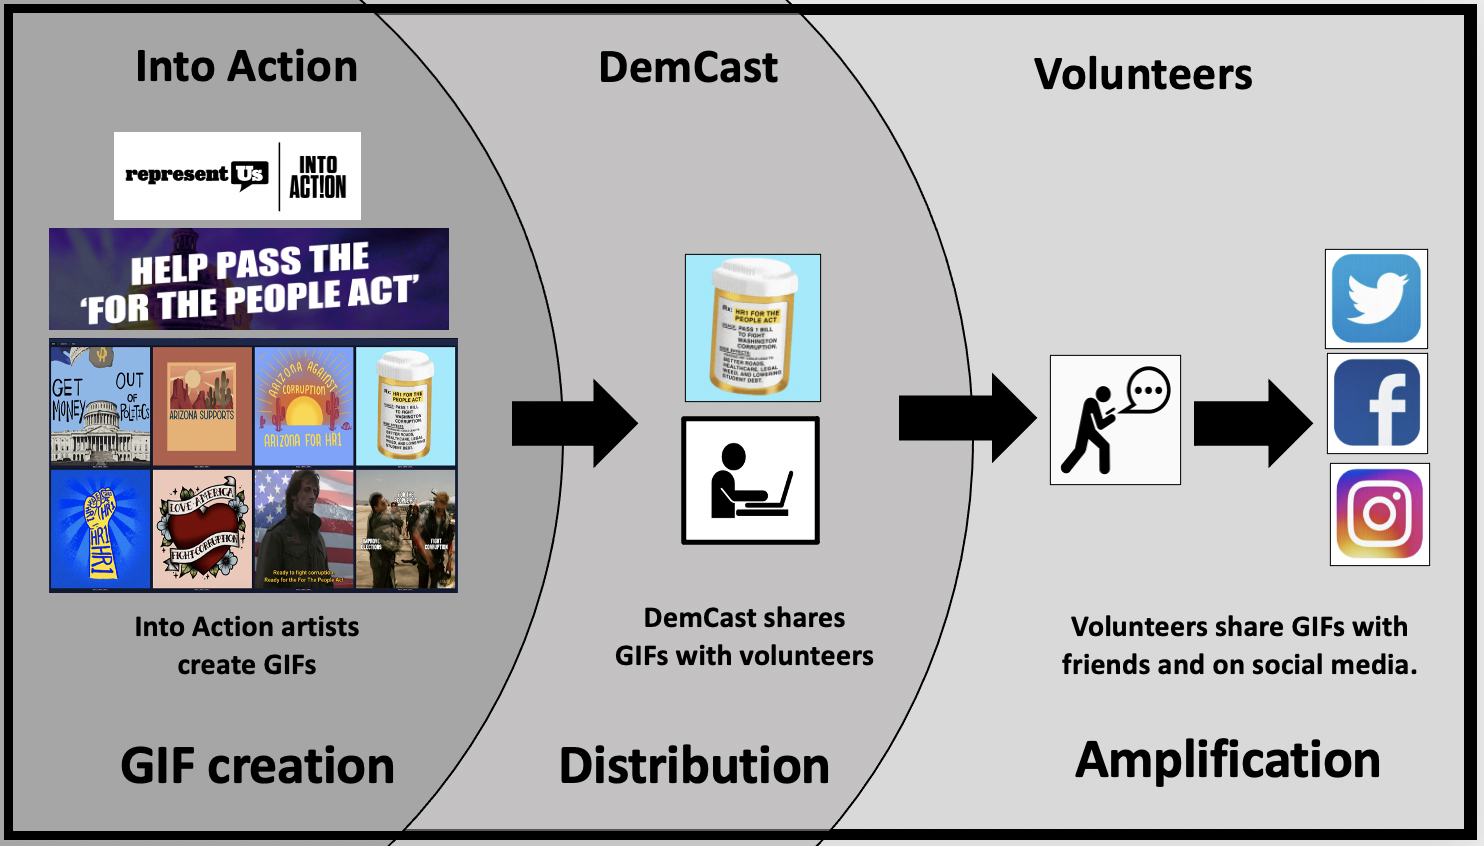 DemCast shares GIFs from Into Action with its volunteers for them to share with their friends and post to social media.